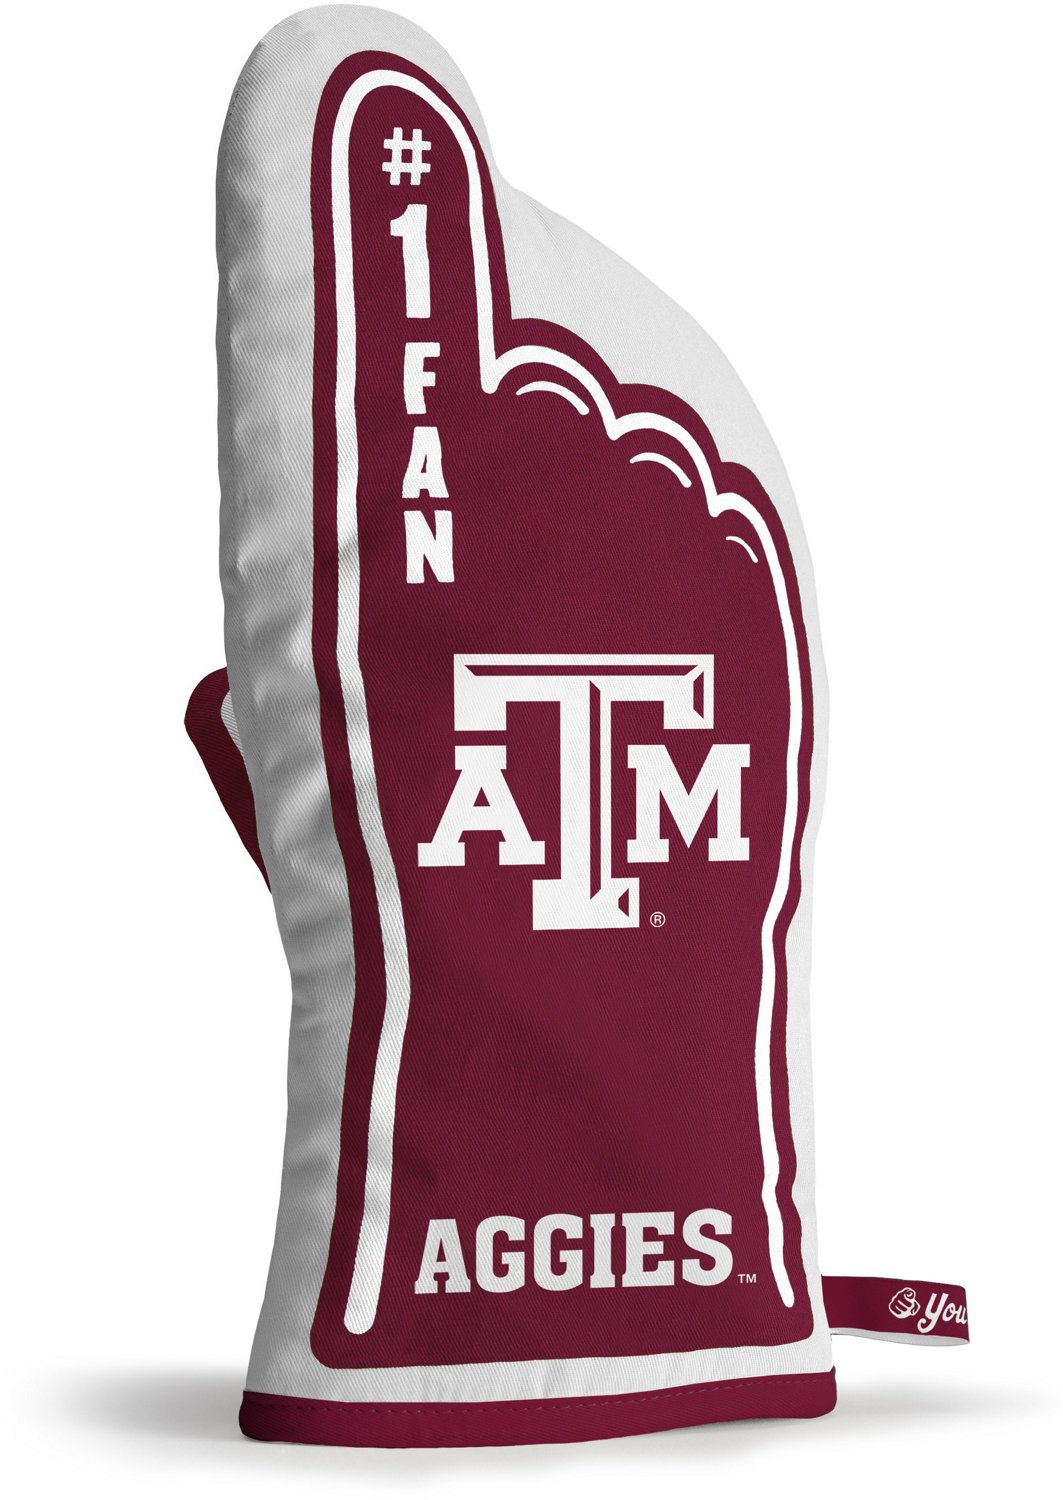 NCAA College Team Logo #1 Fan Finger Oven Mitts - The Man Registry